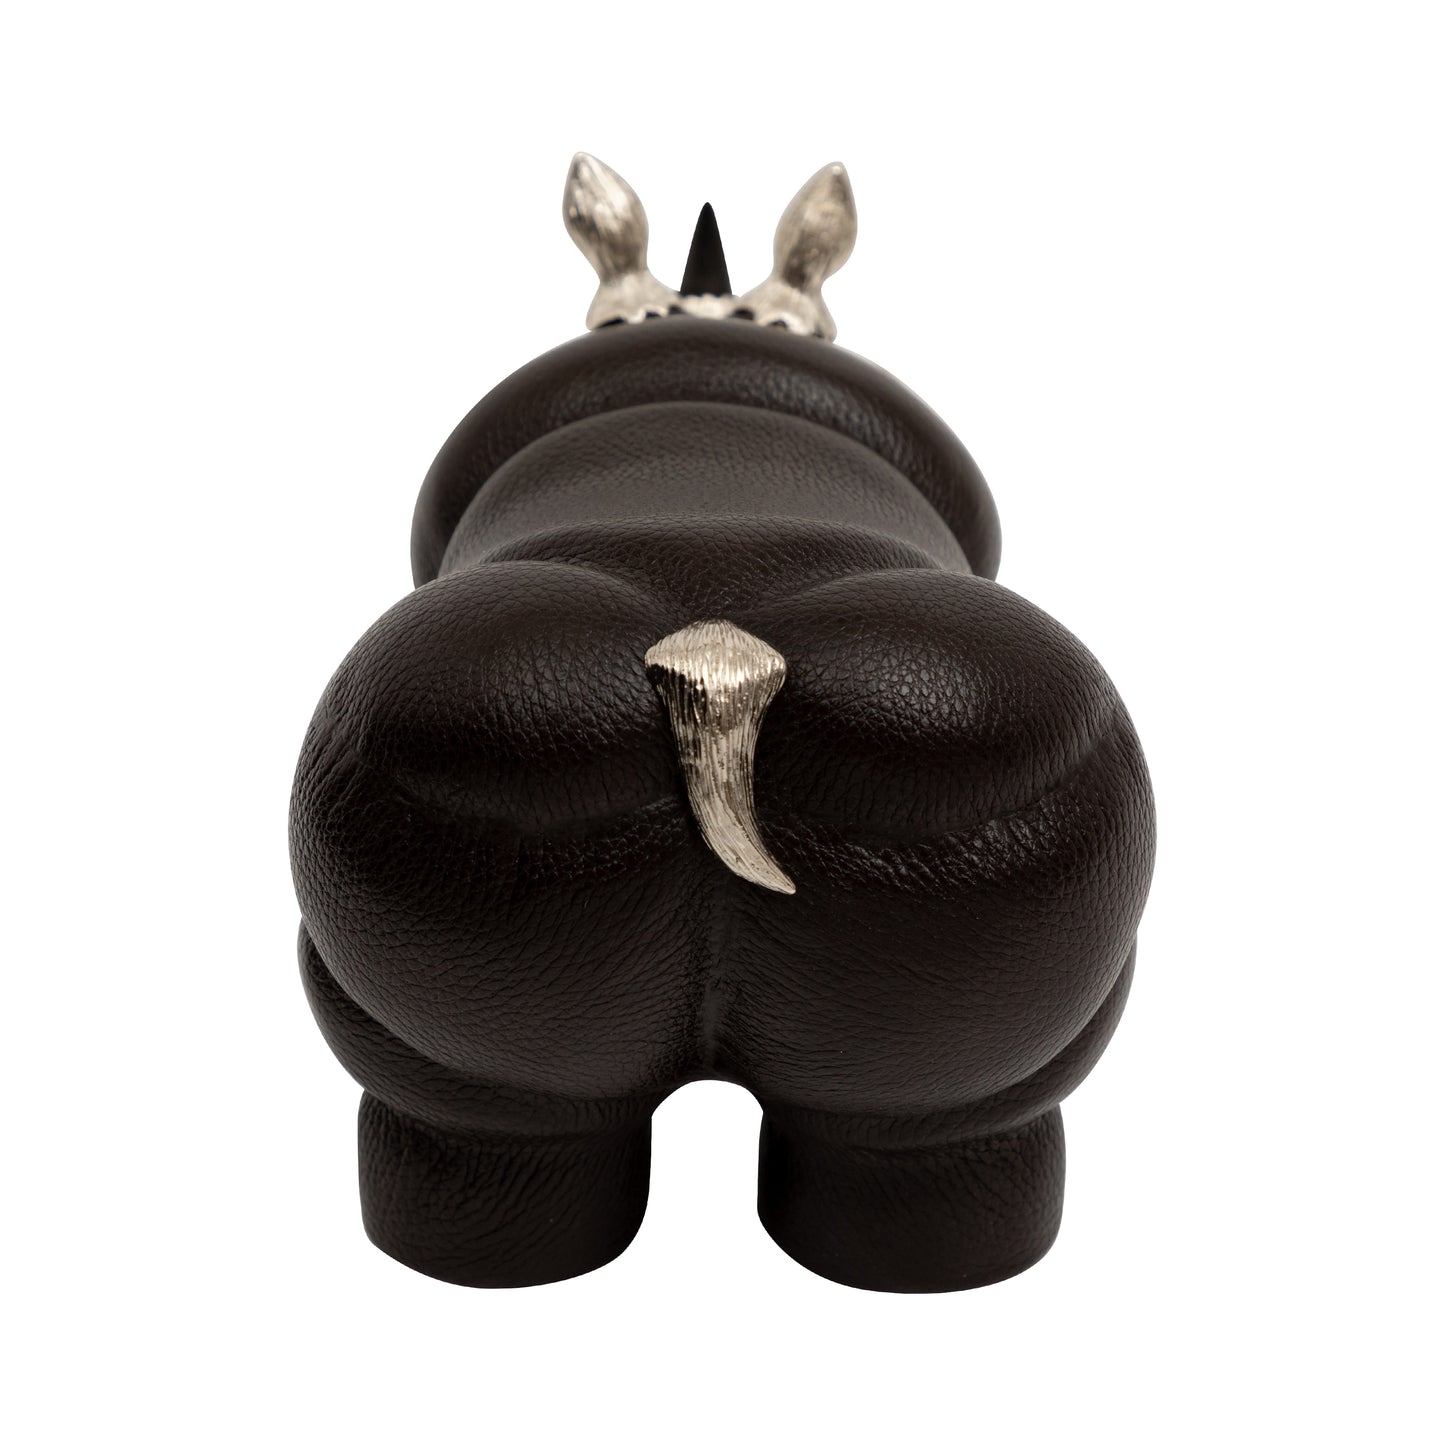 Rhino Paperweight/Bookend